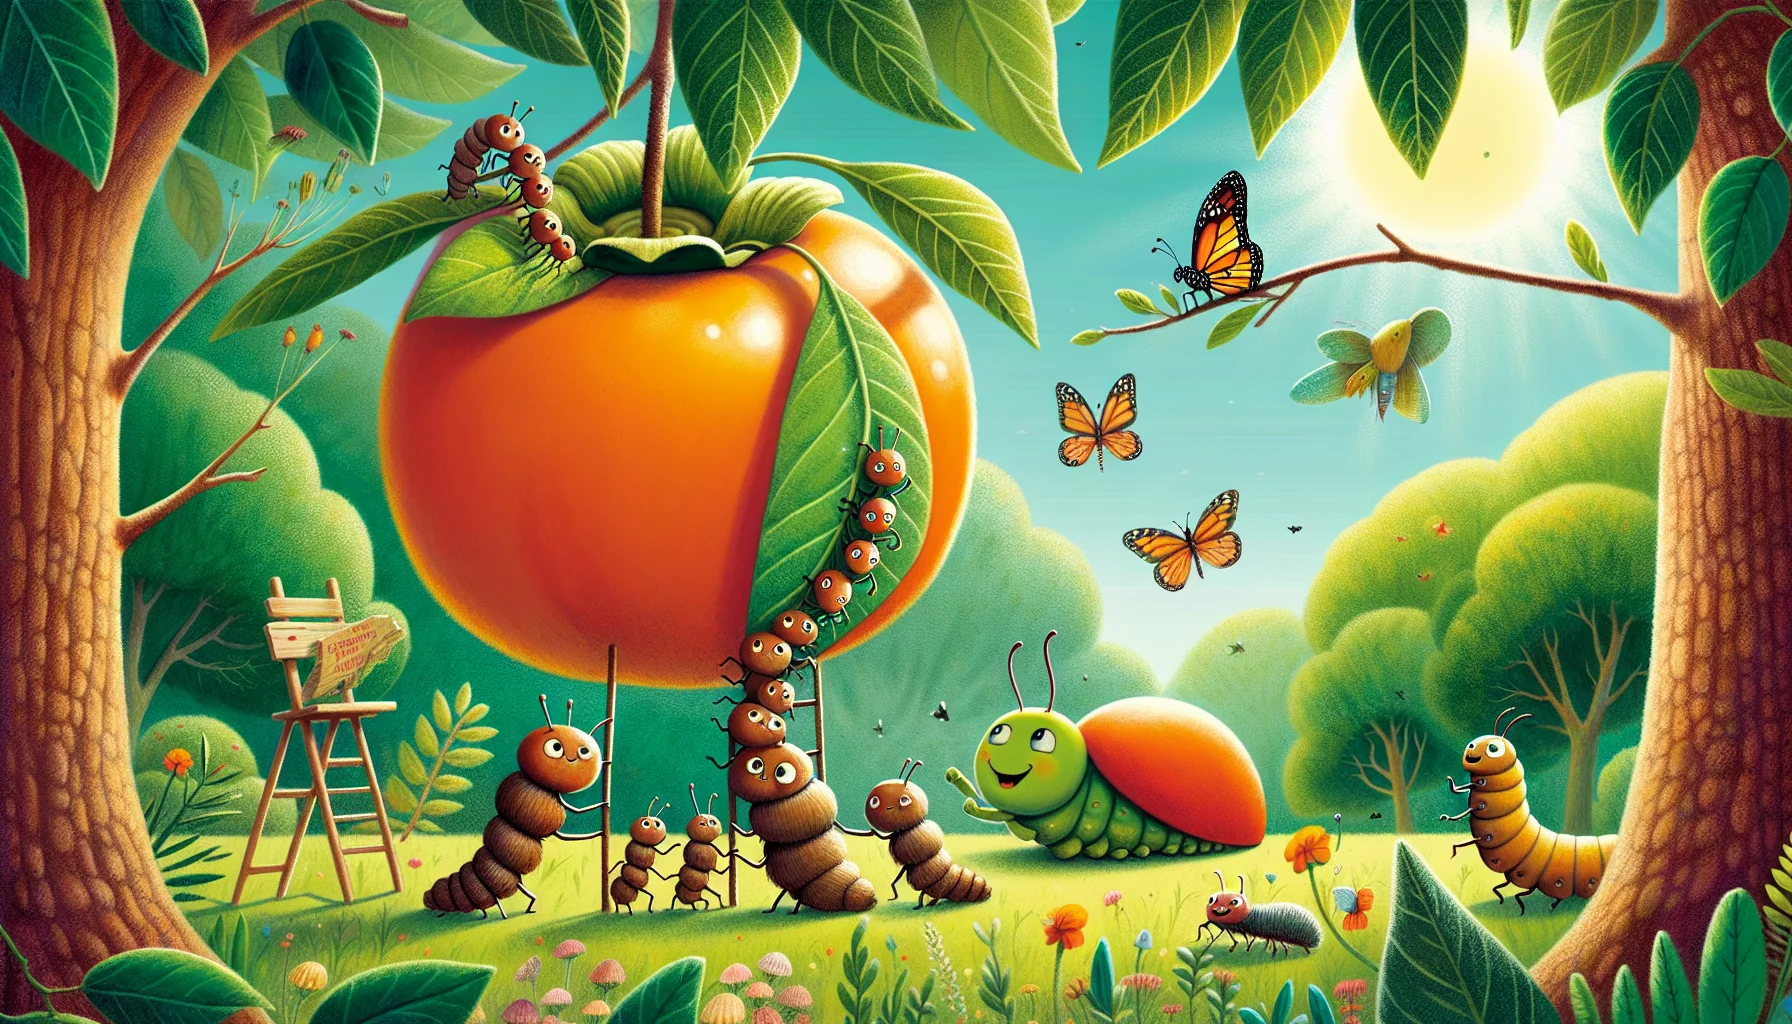 Imagine a whimsical scene in a lush garden during a sunny day with birds twittering and butterflies fluttering around. In the midst of this, a perfectly ripe persimmon hanging heavy on a leafy tree becomes the talk of the town for the insects. A procession of beady-eyed ants forms a line, ascending the tree trunk to reach their prized fruit. A cheeky caterpillar, poking out from a leaf, watches them with a smirk with his chubby arms crossed. Meanwhile, a bug couple is having their picnic under the persimmon's bountiful shade, indulging in an aphid feast. This adorable scenario encourages people of all ages to indulge in the pleasures of gardening, instilling an appreciation for nature's humorous and delightful moments.